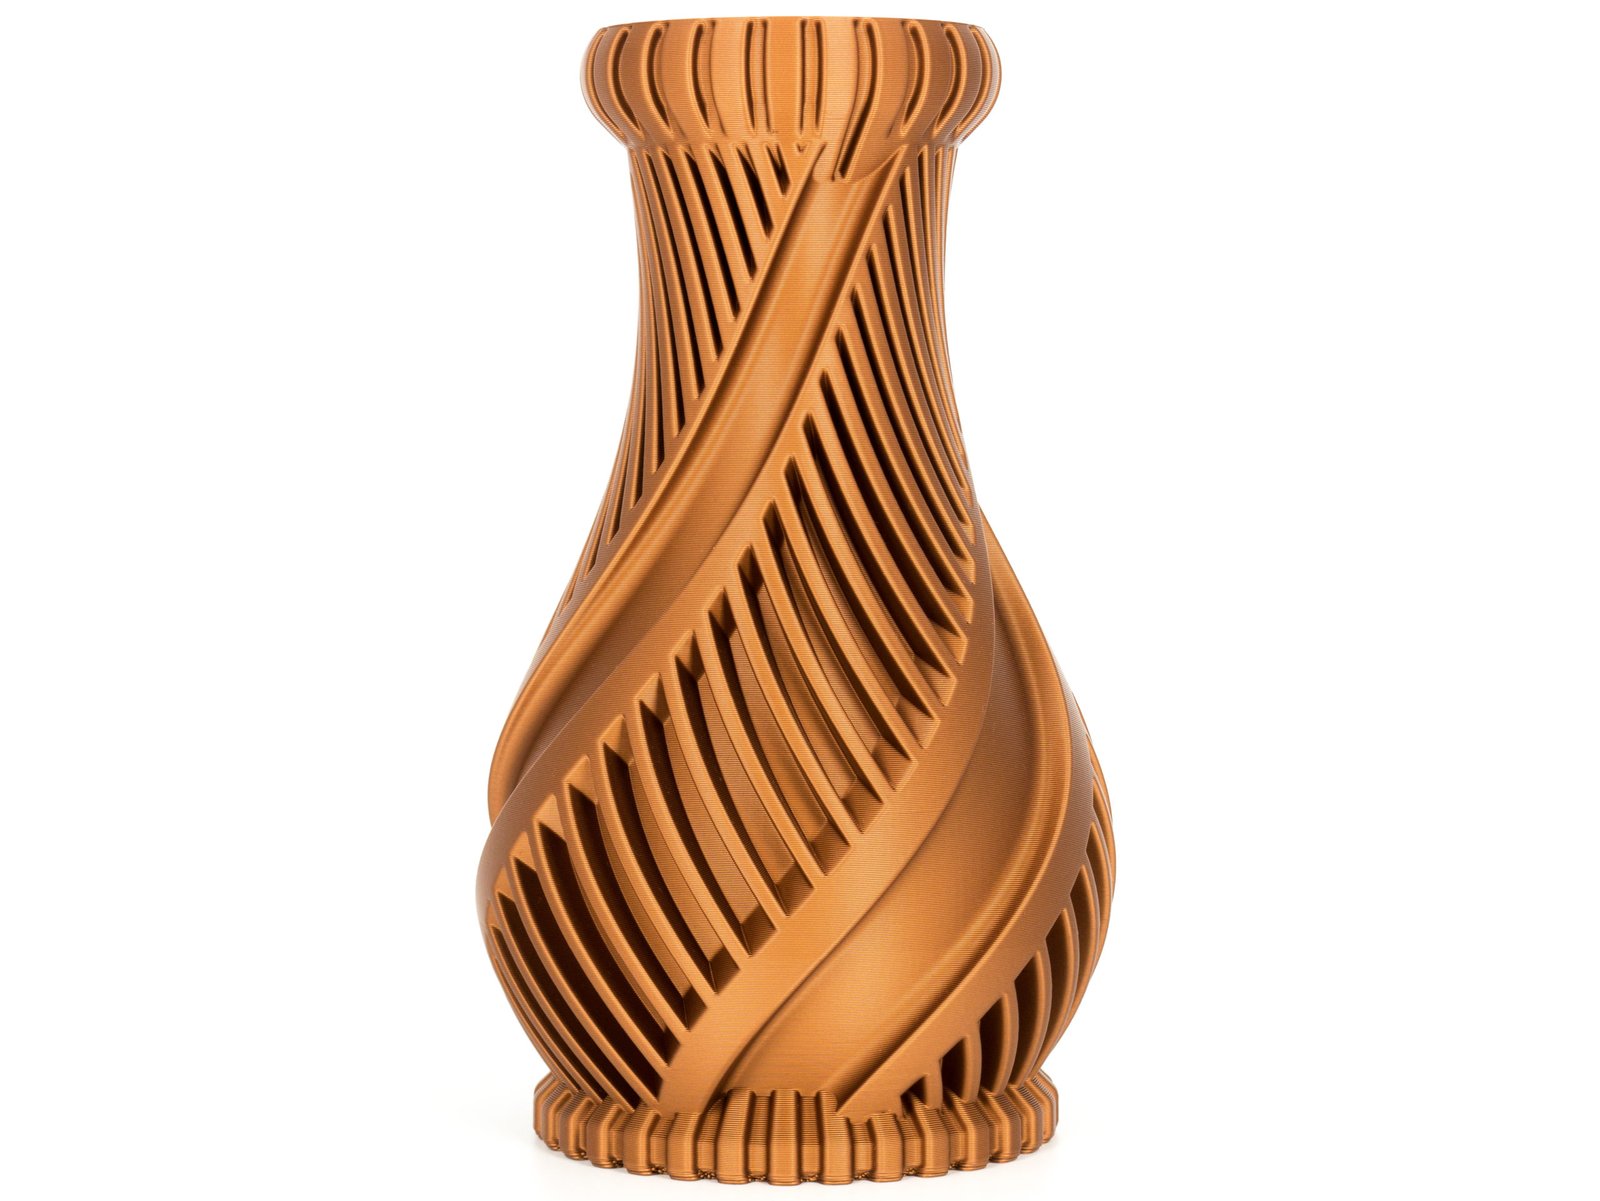 New Product: Tactical Vase